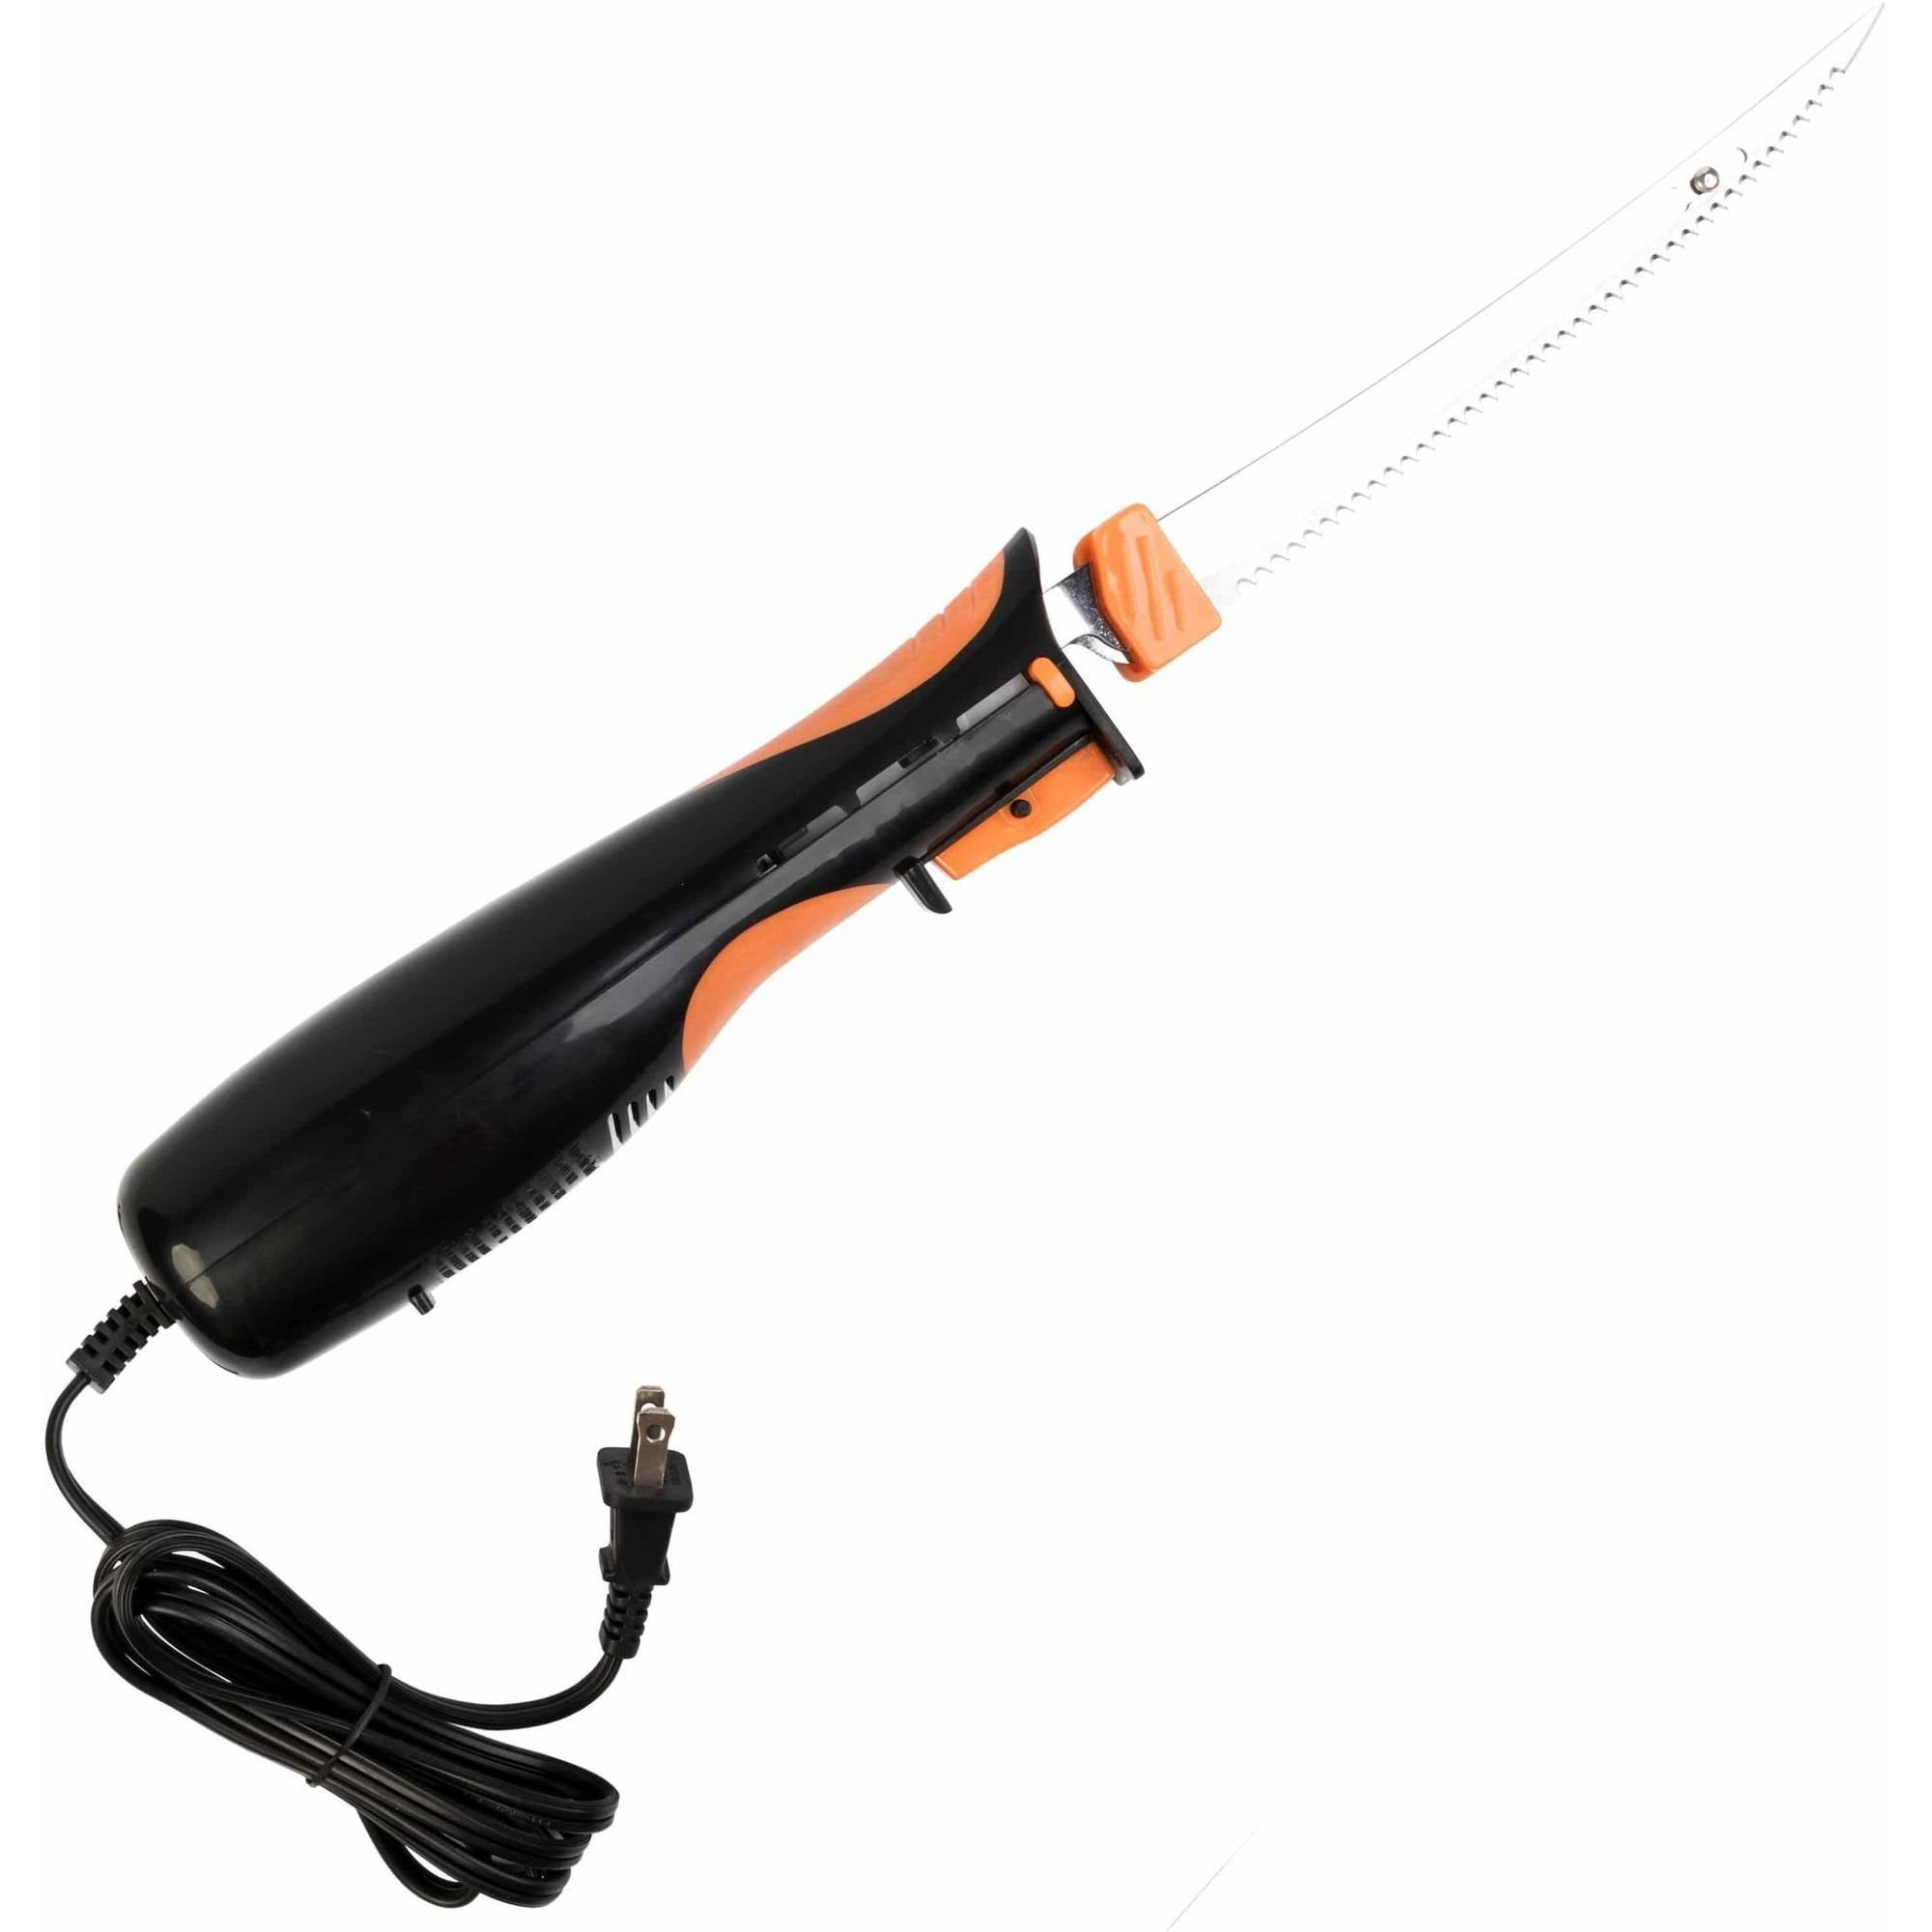 buy-ozark-trail-electric-fishing-fillet-knife-online-at-lowest-price-in